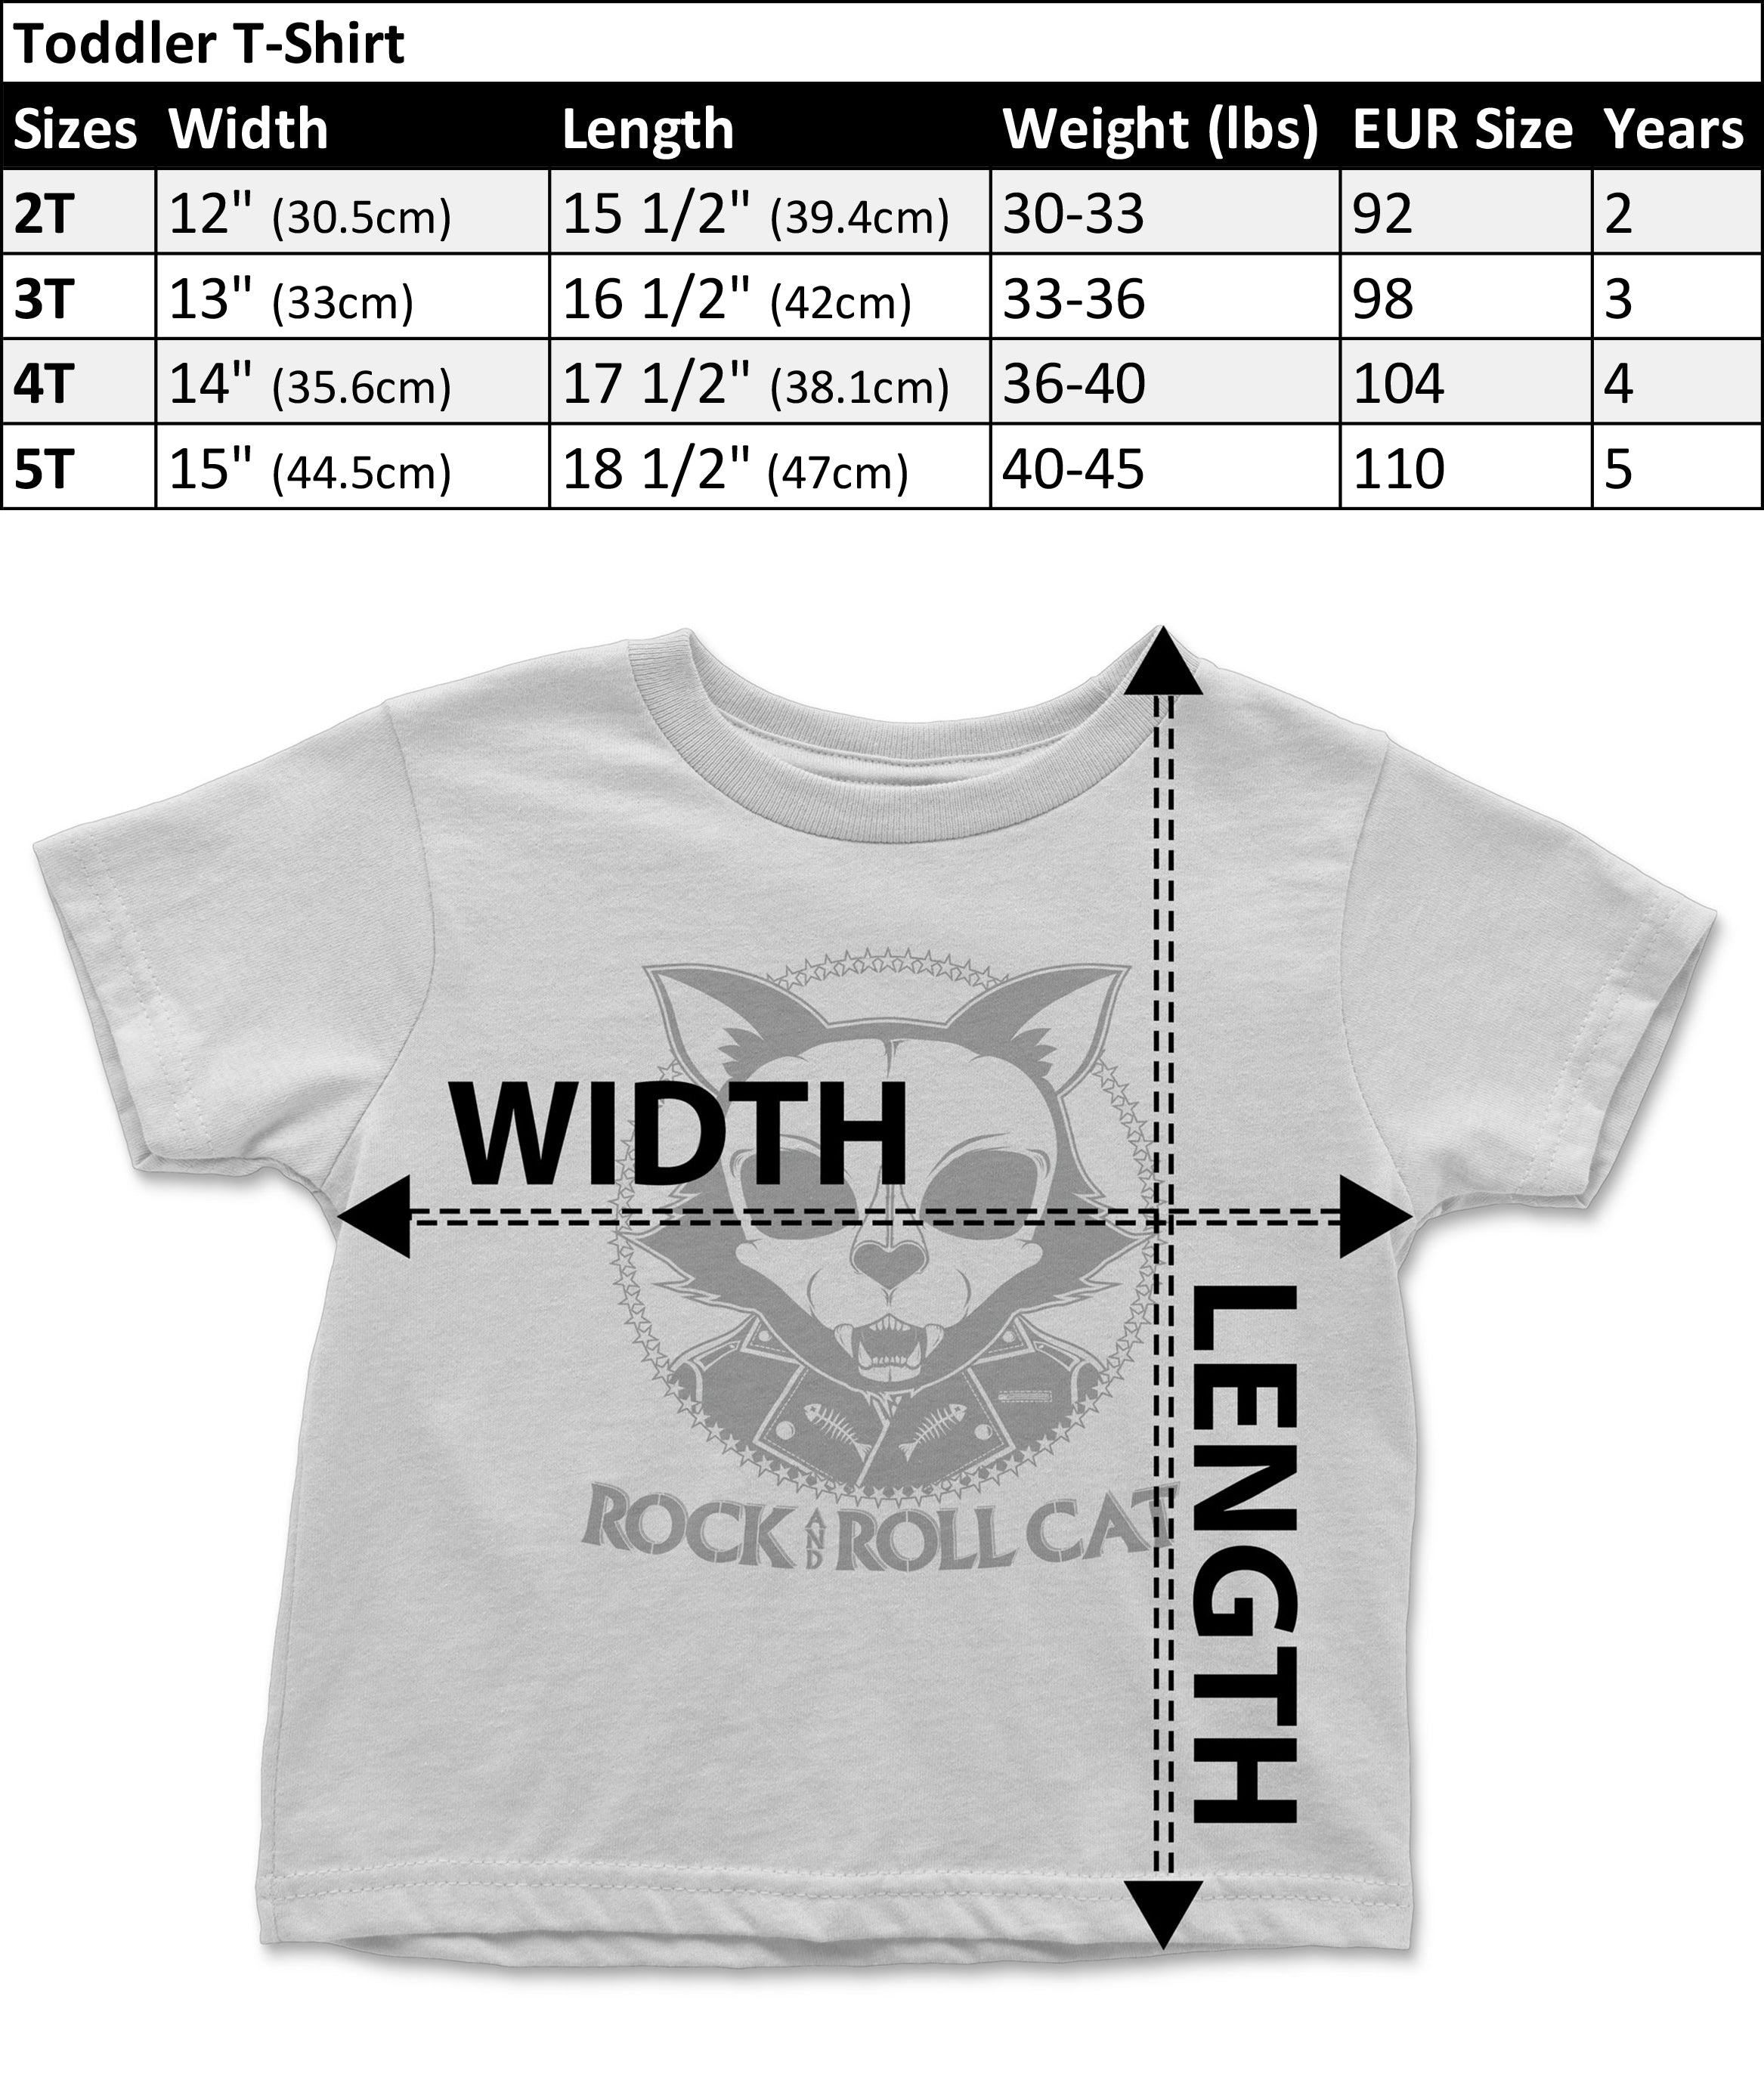 Toddler T Shirt Size Chart | Rock and Roll Cat